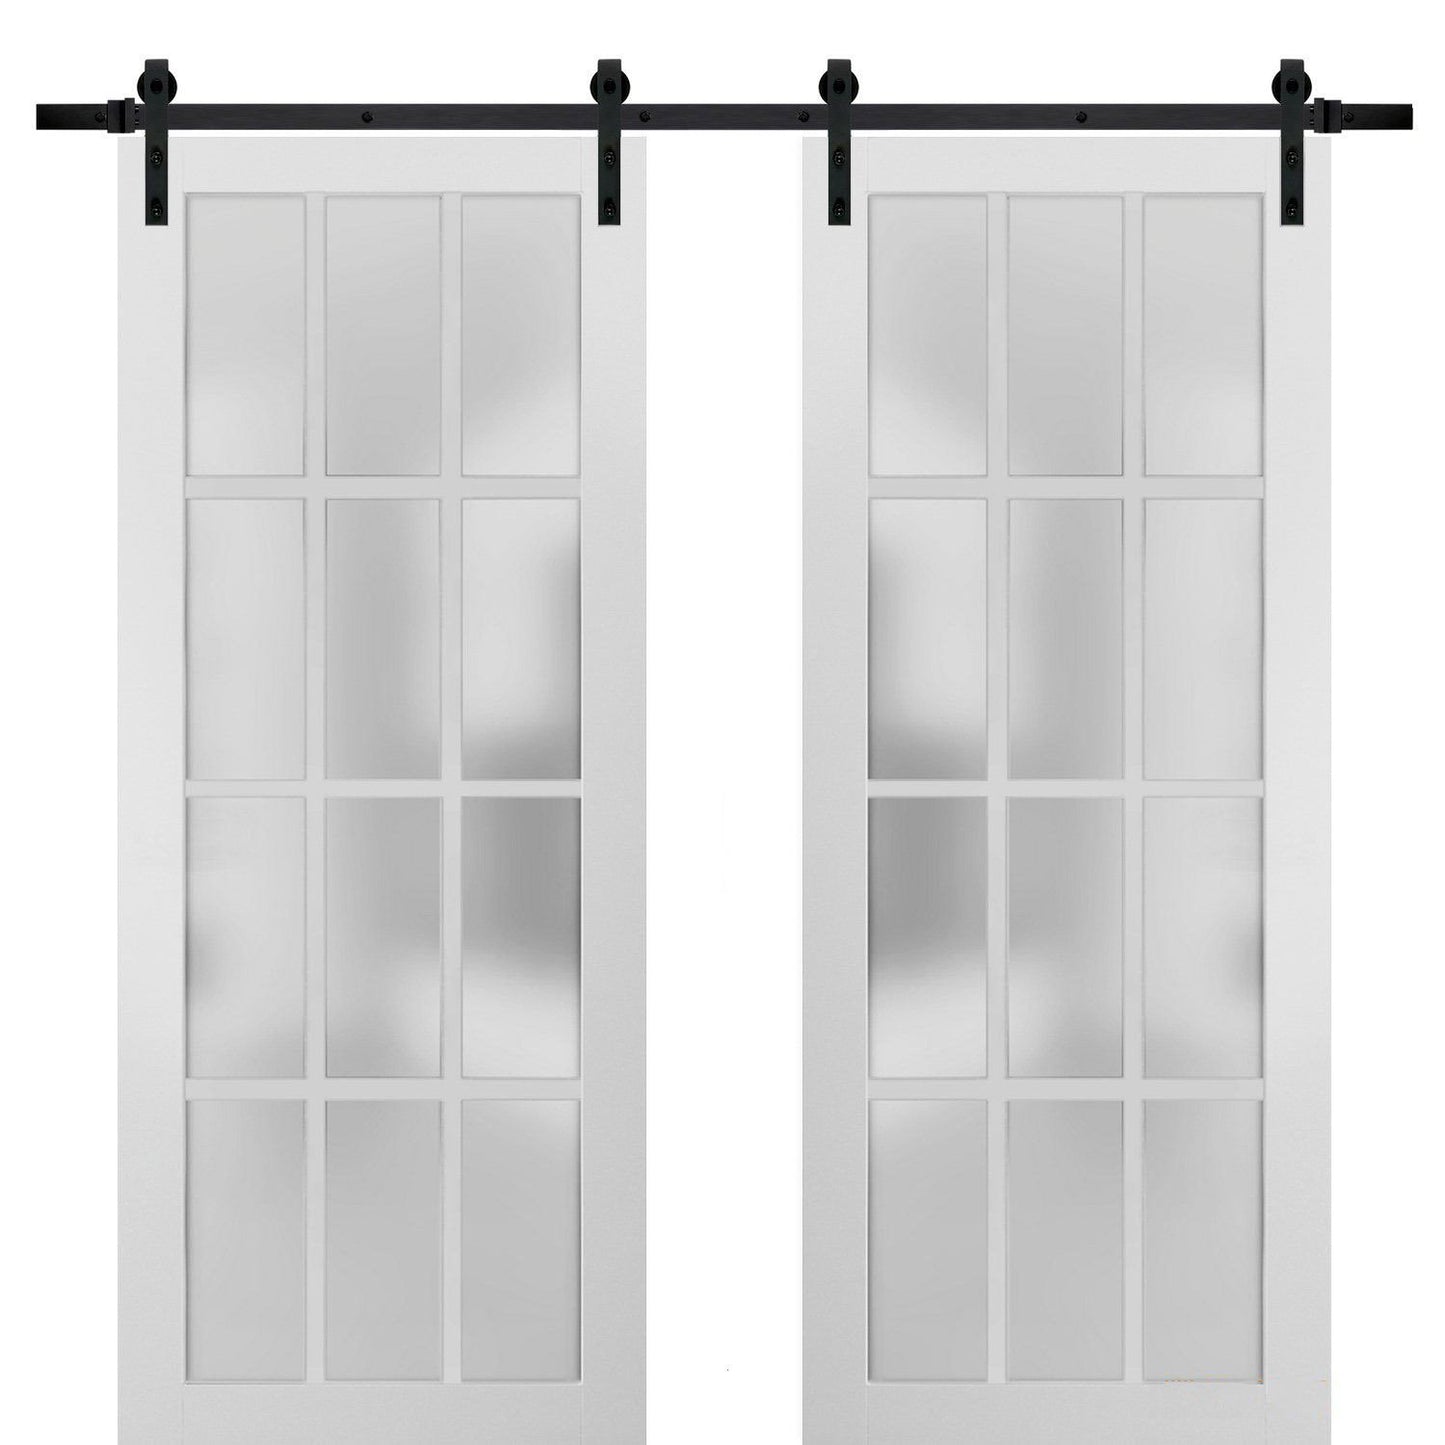 Felicia 3312 Matte White Double Barn Door with 12 Lites Frosted Glass | Black Rail